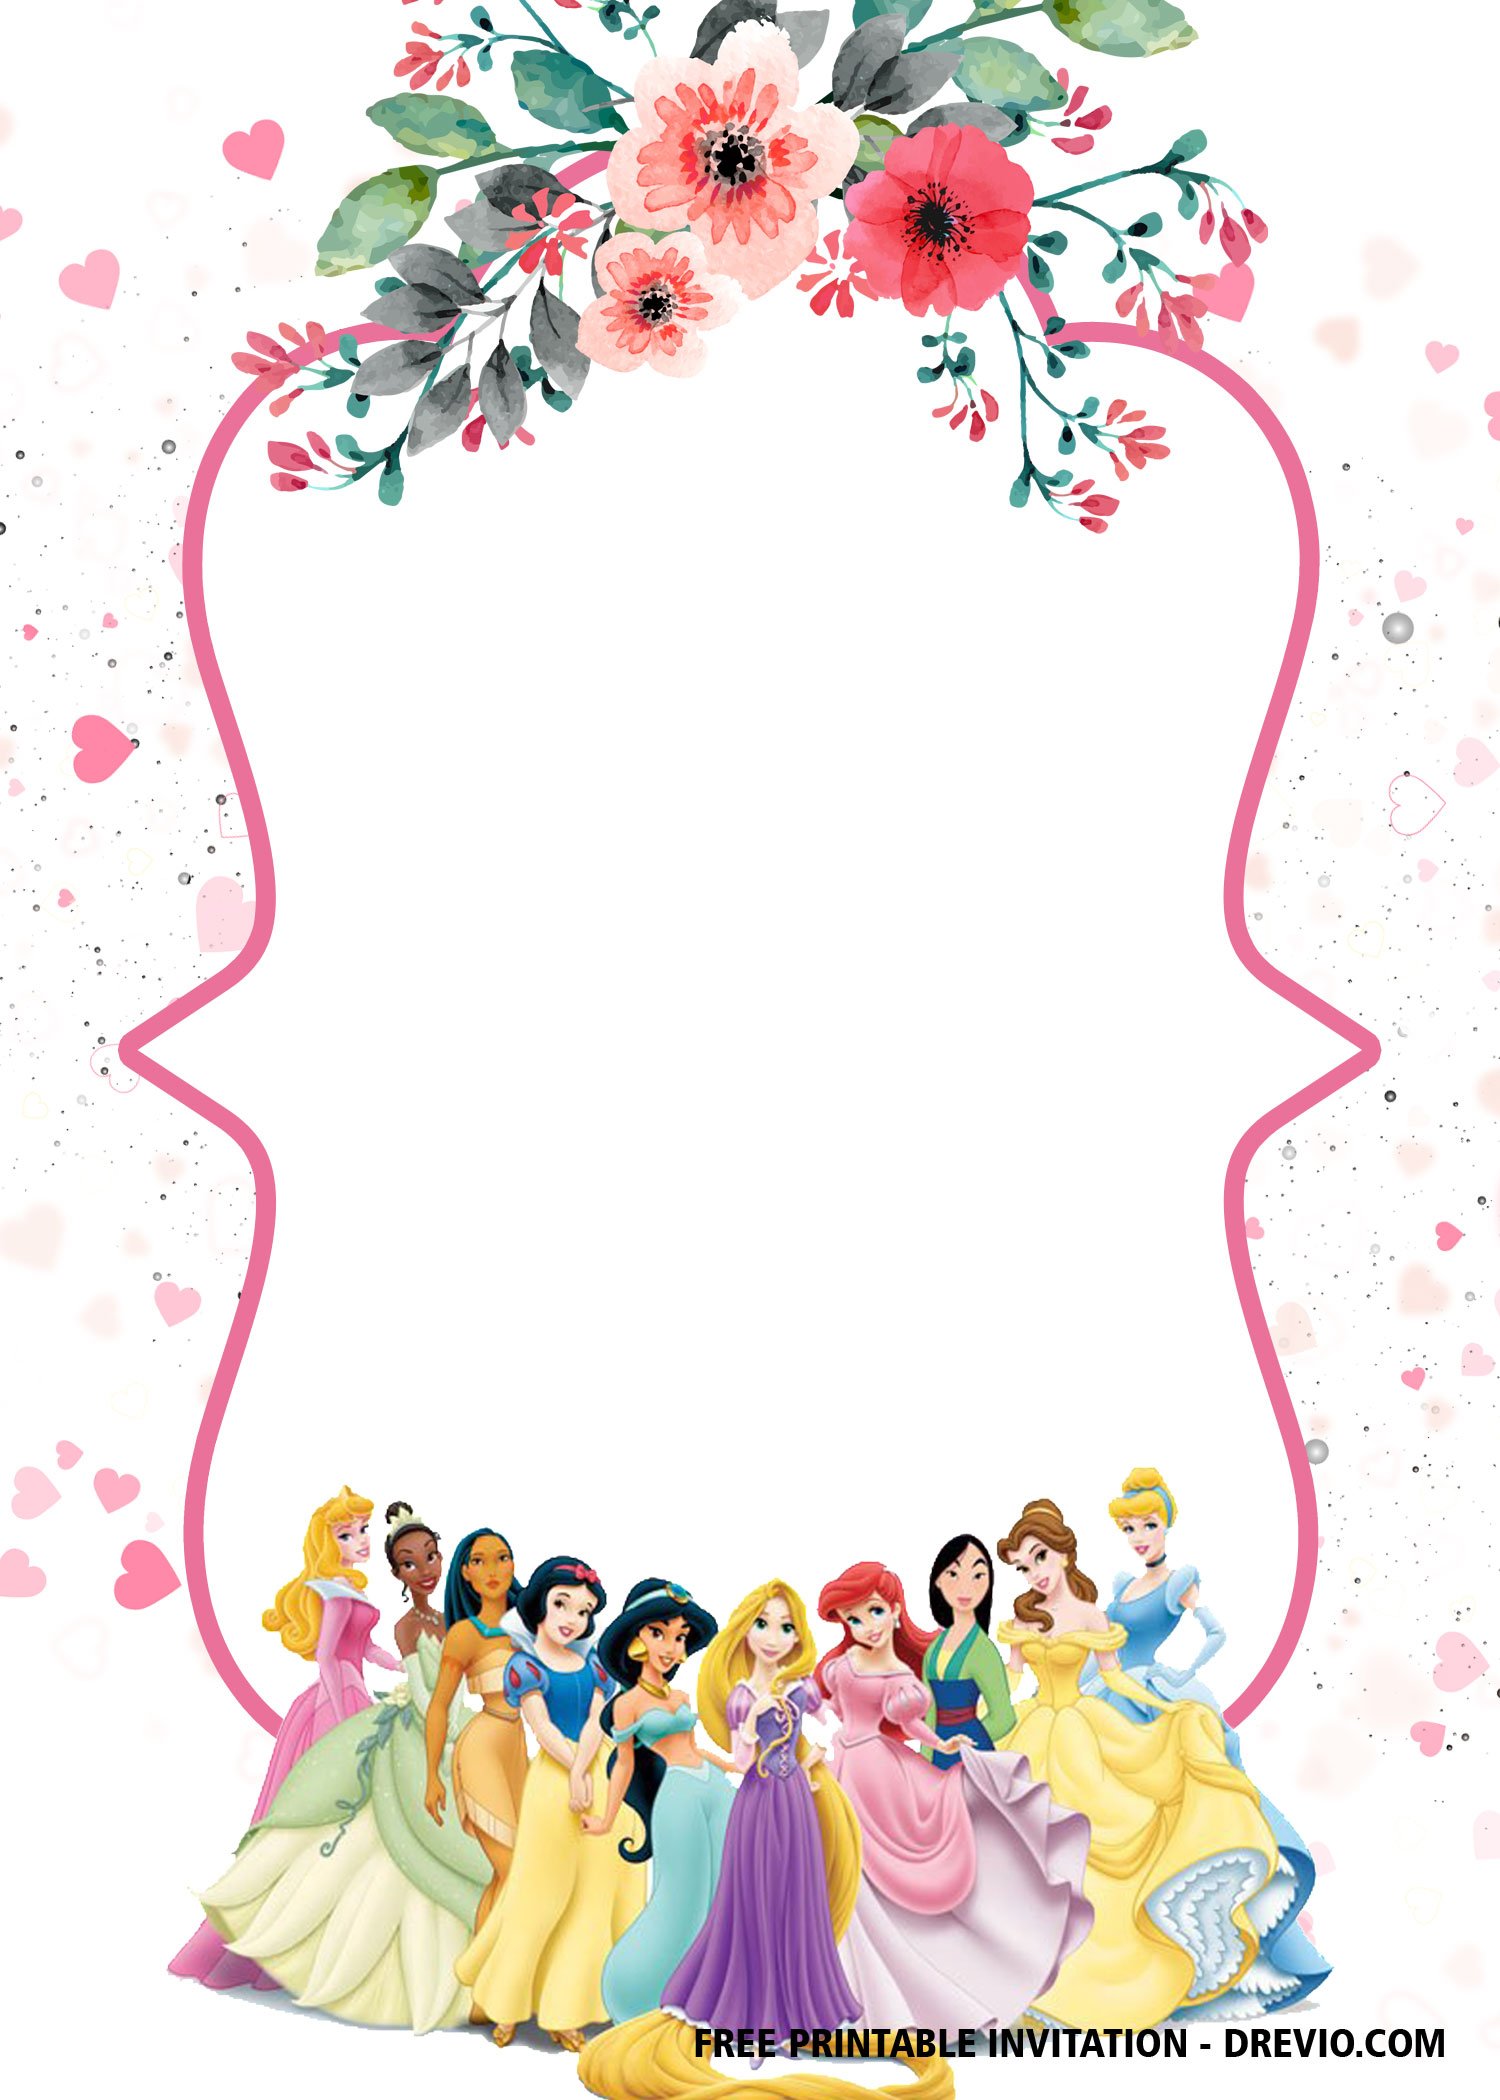 FREE Disney Princess Invitation Template for Your Little Girl’s